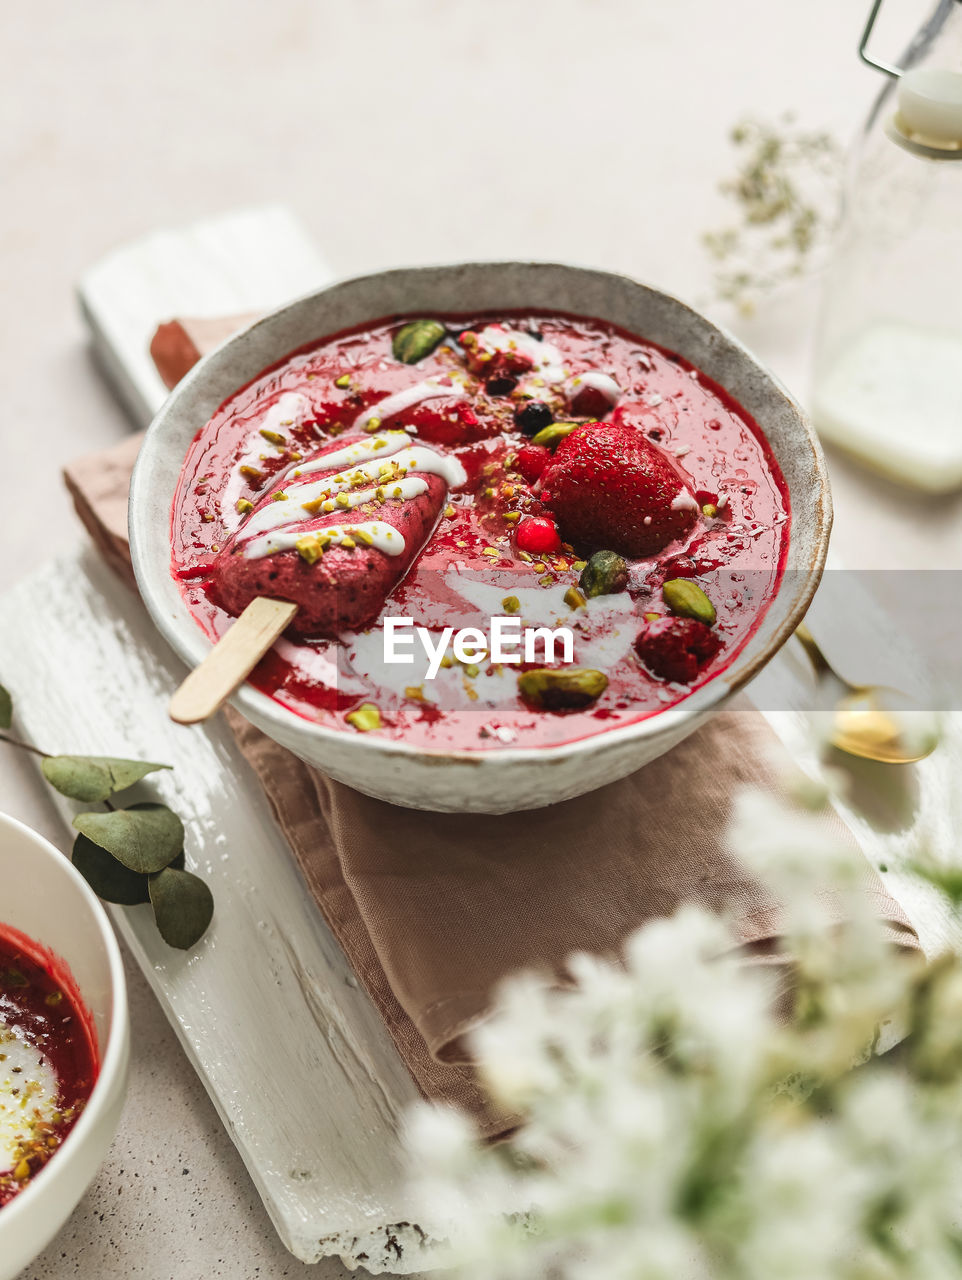 From above of tasty smoothie with fresh berries and ice candy with crushed pistachios and yogurt in bowl